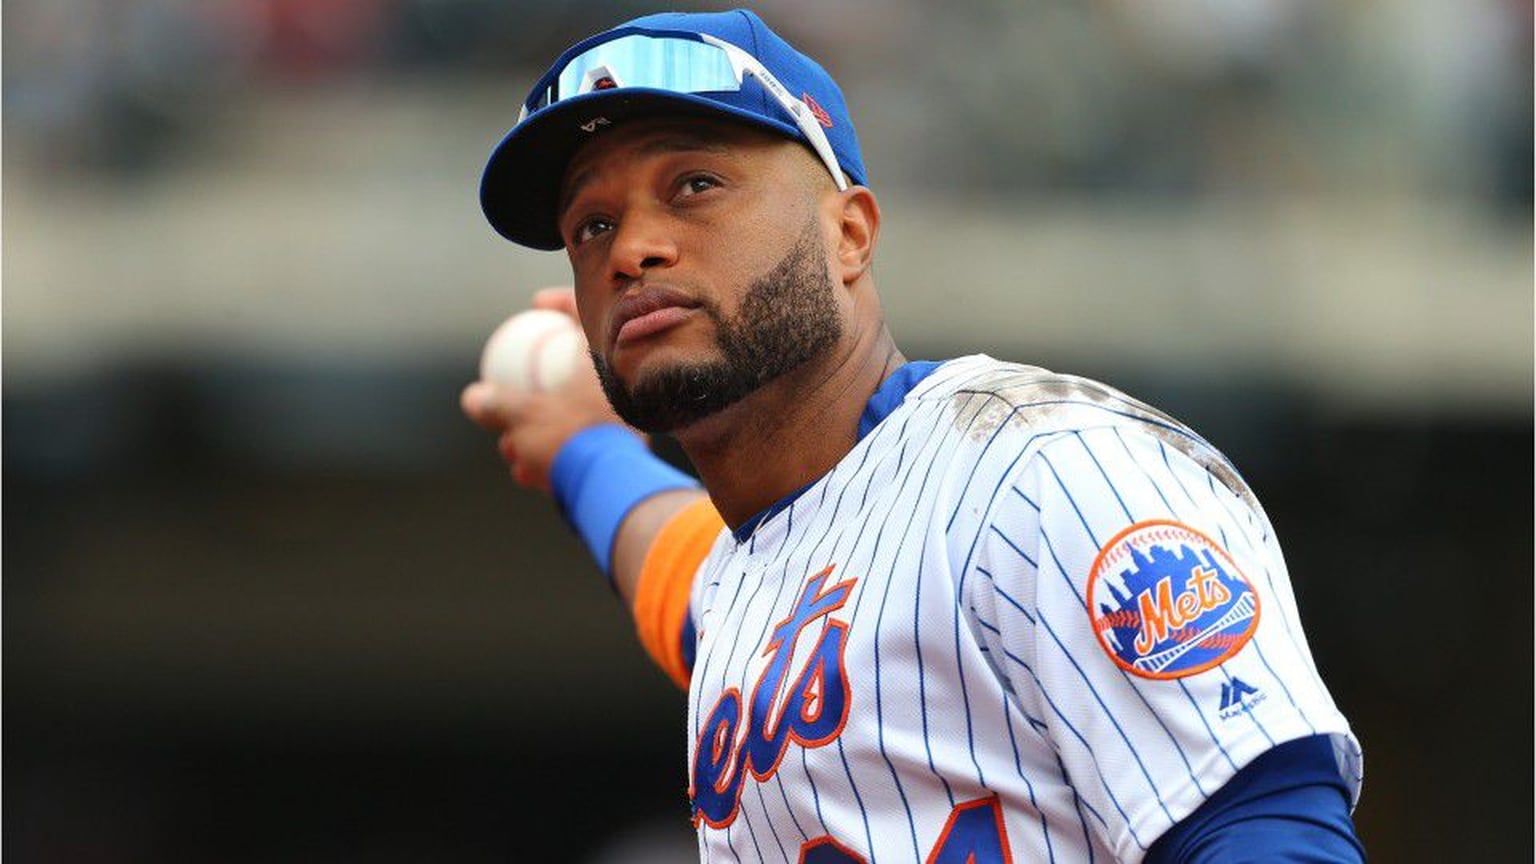 Mets 2B Cano suspended 162 games by MLB after drug test